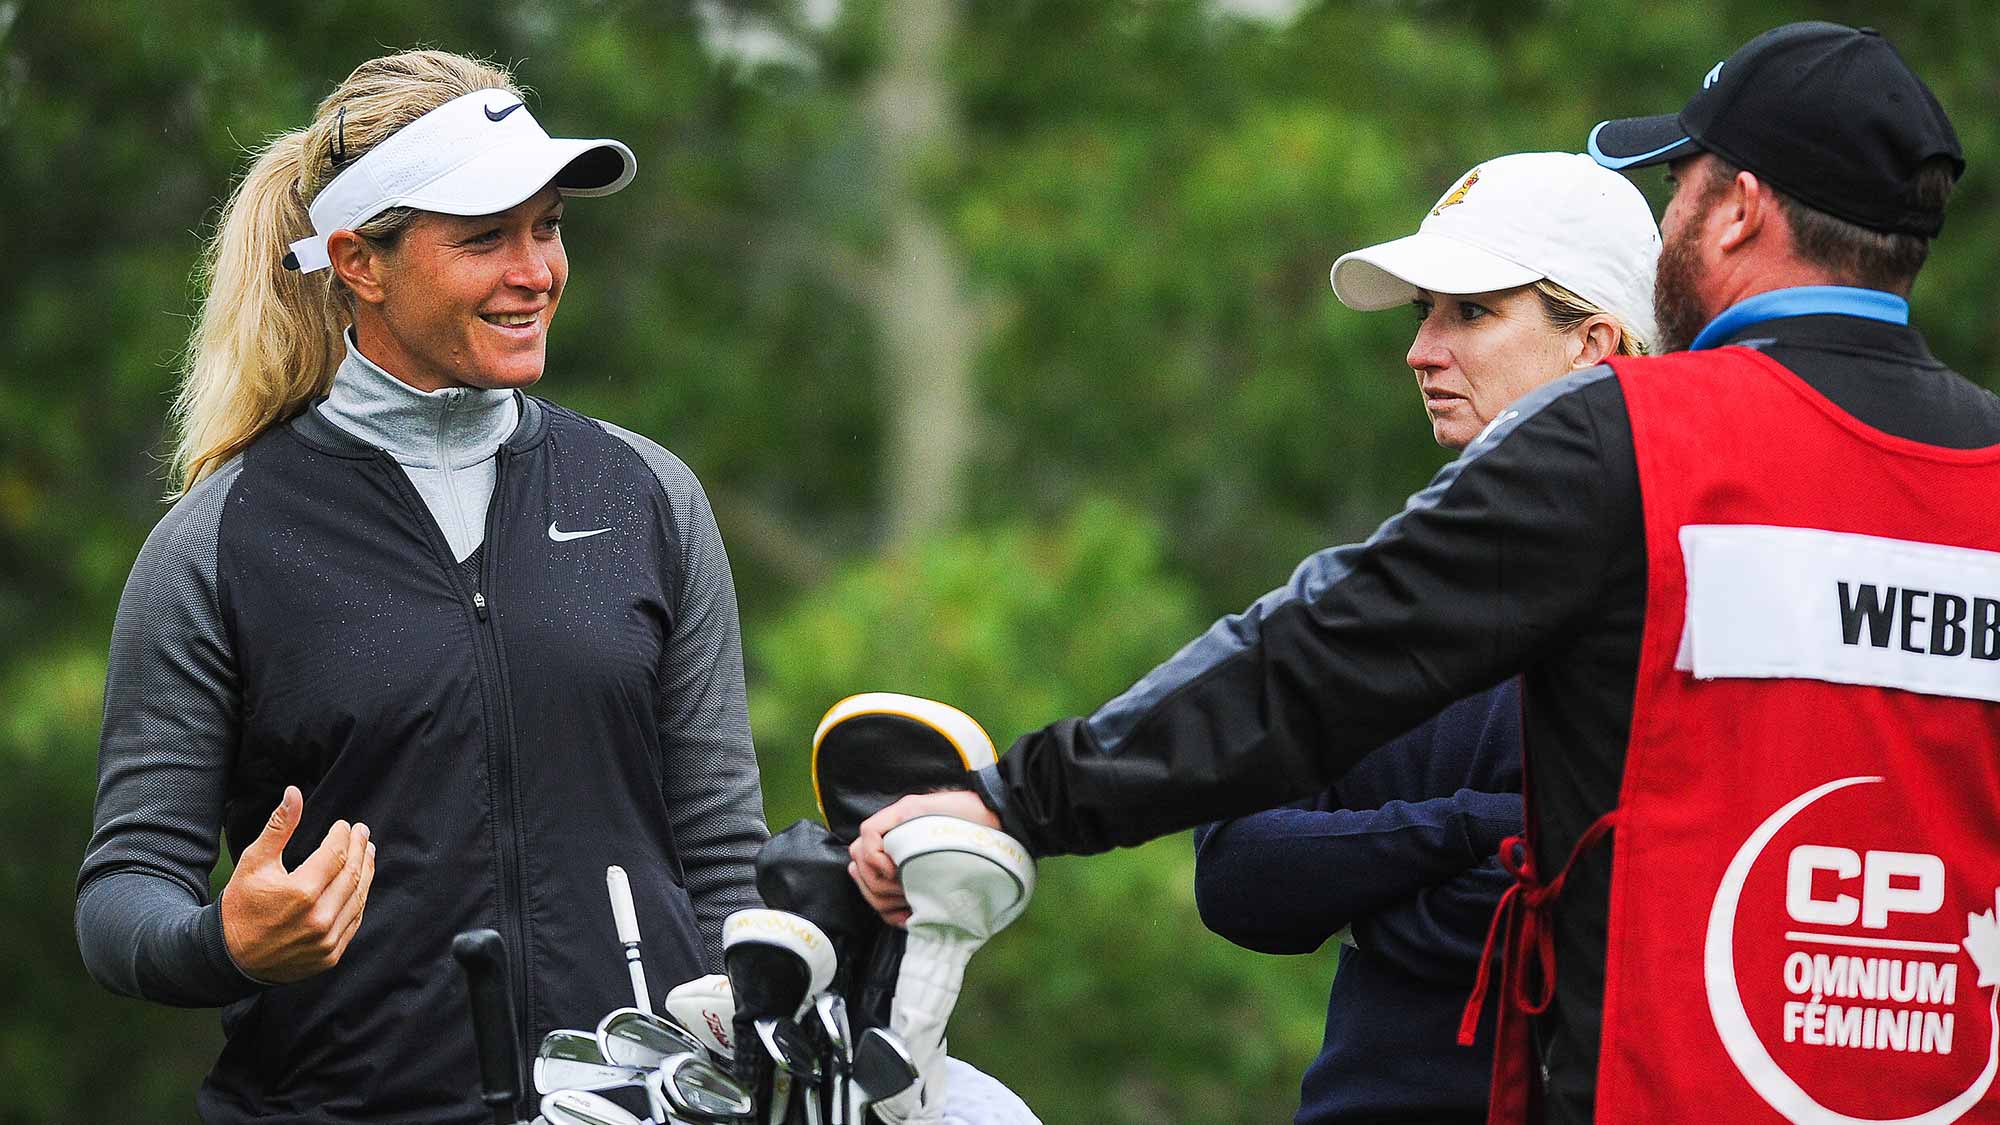 Suzann Pettersen of Norway talks with Karrie Webb of Australia prior to teeing off on the 11th hole during the first round of the Canadian Pacific Women's Open at Priddis Greens Golf and Country Club